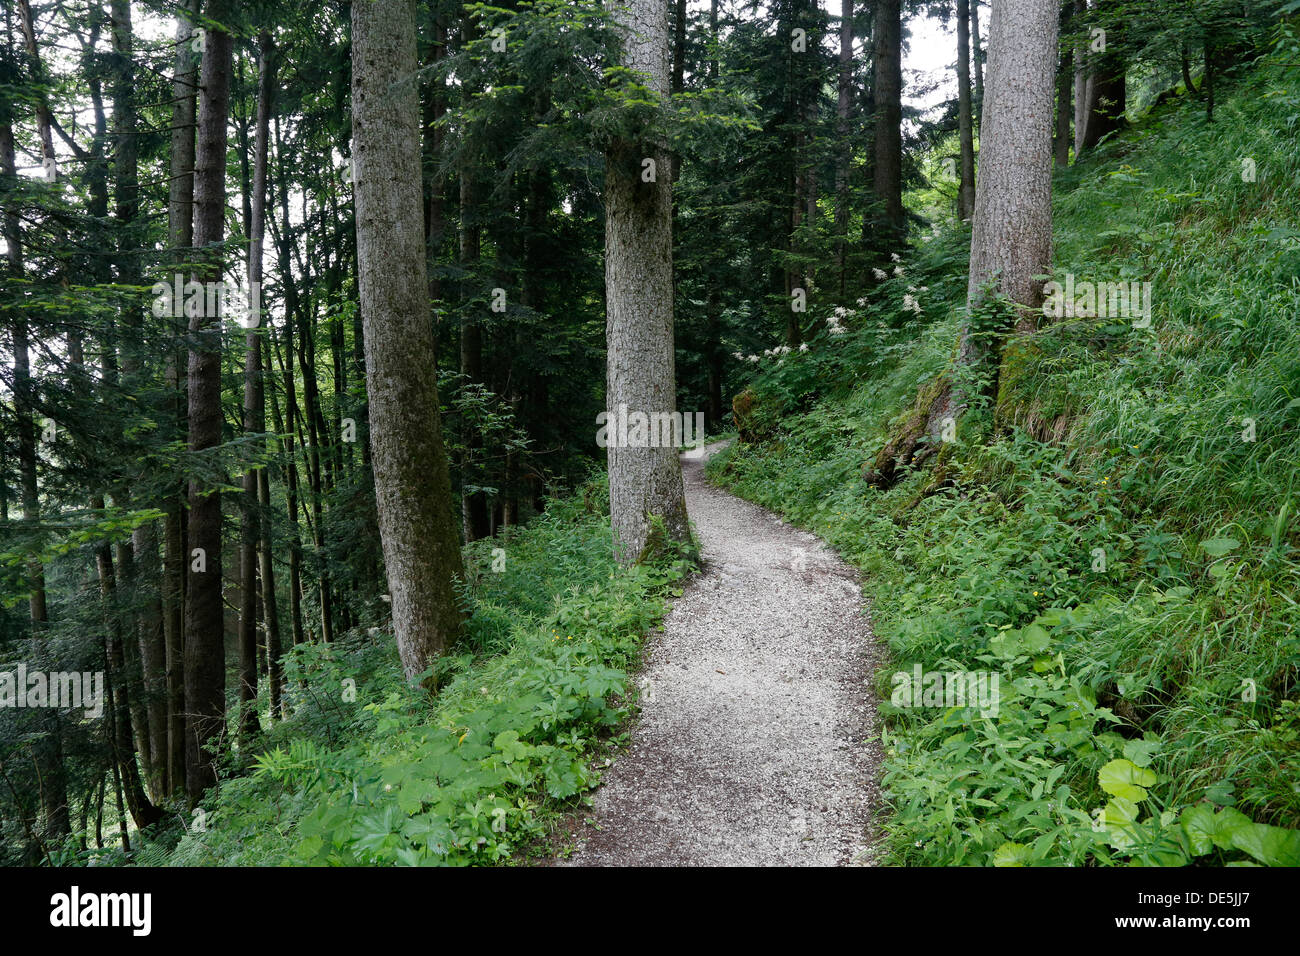 Hiking trail in a forest Stock Photo